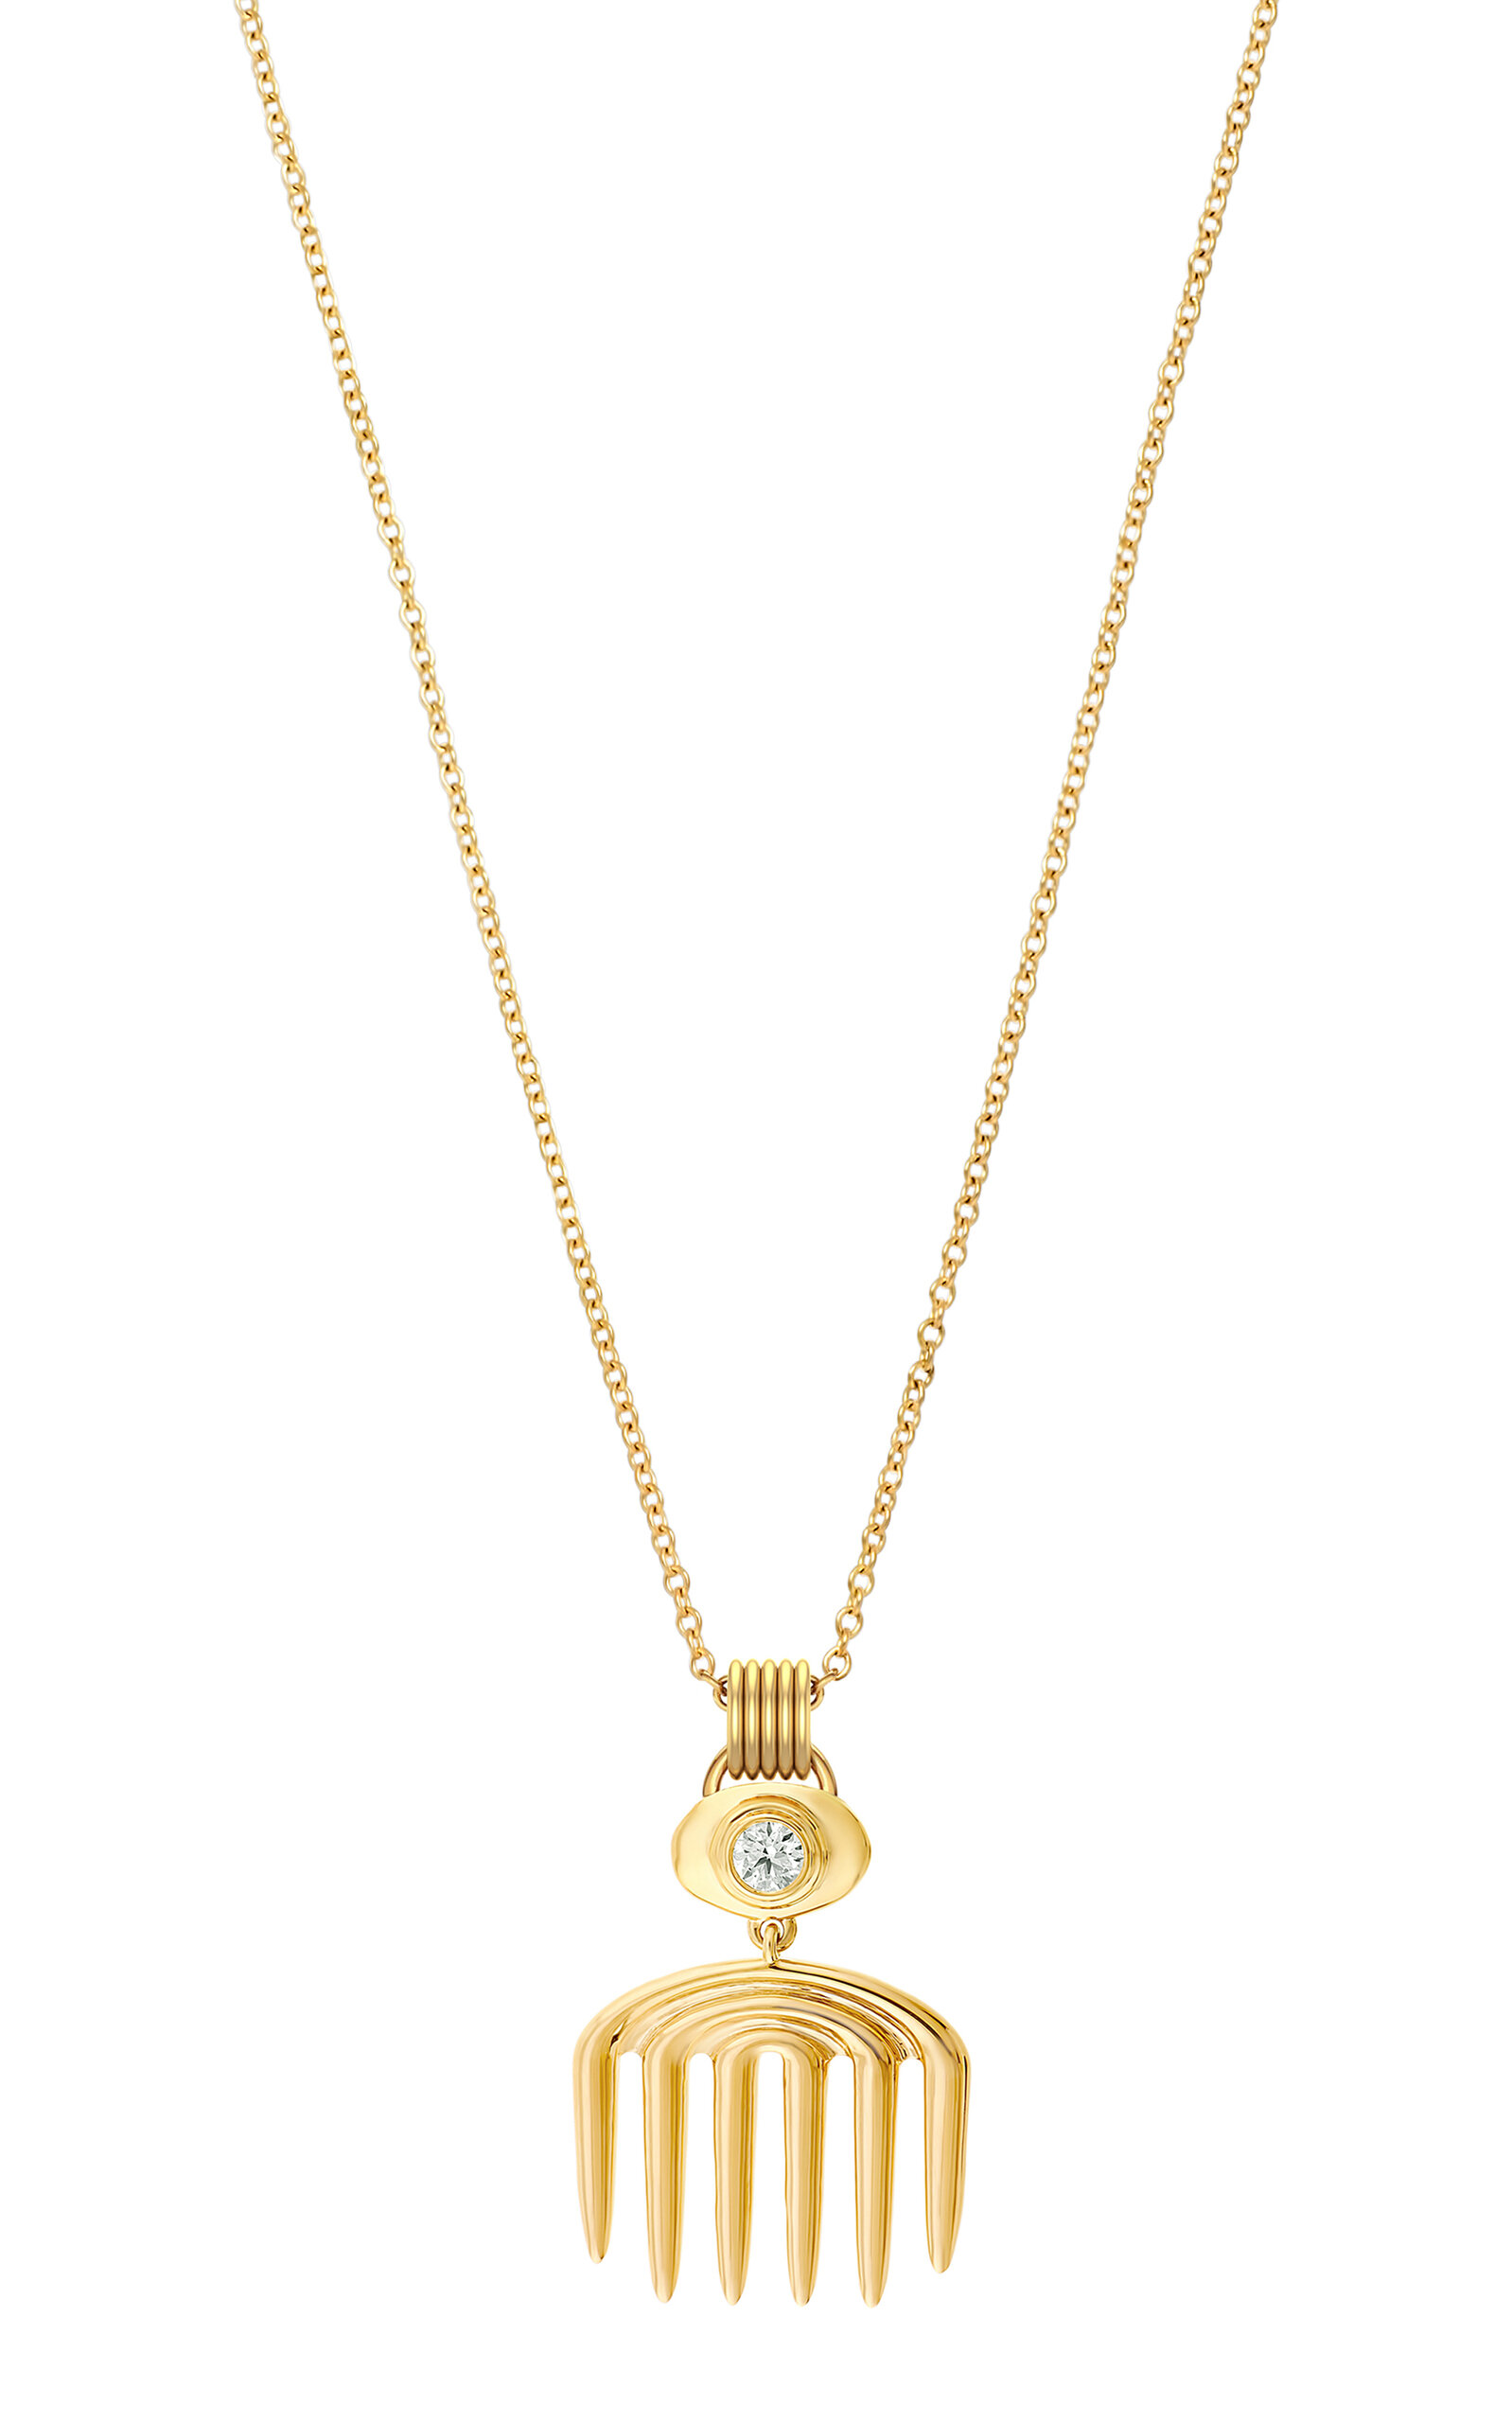 ALMASIKA 18K YELLOW GOLD SAGESSE VICI COMB CHARM NECKLACE